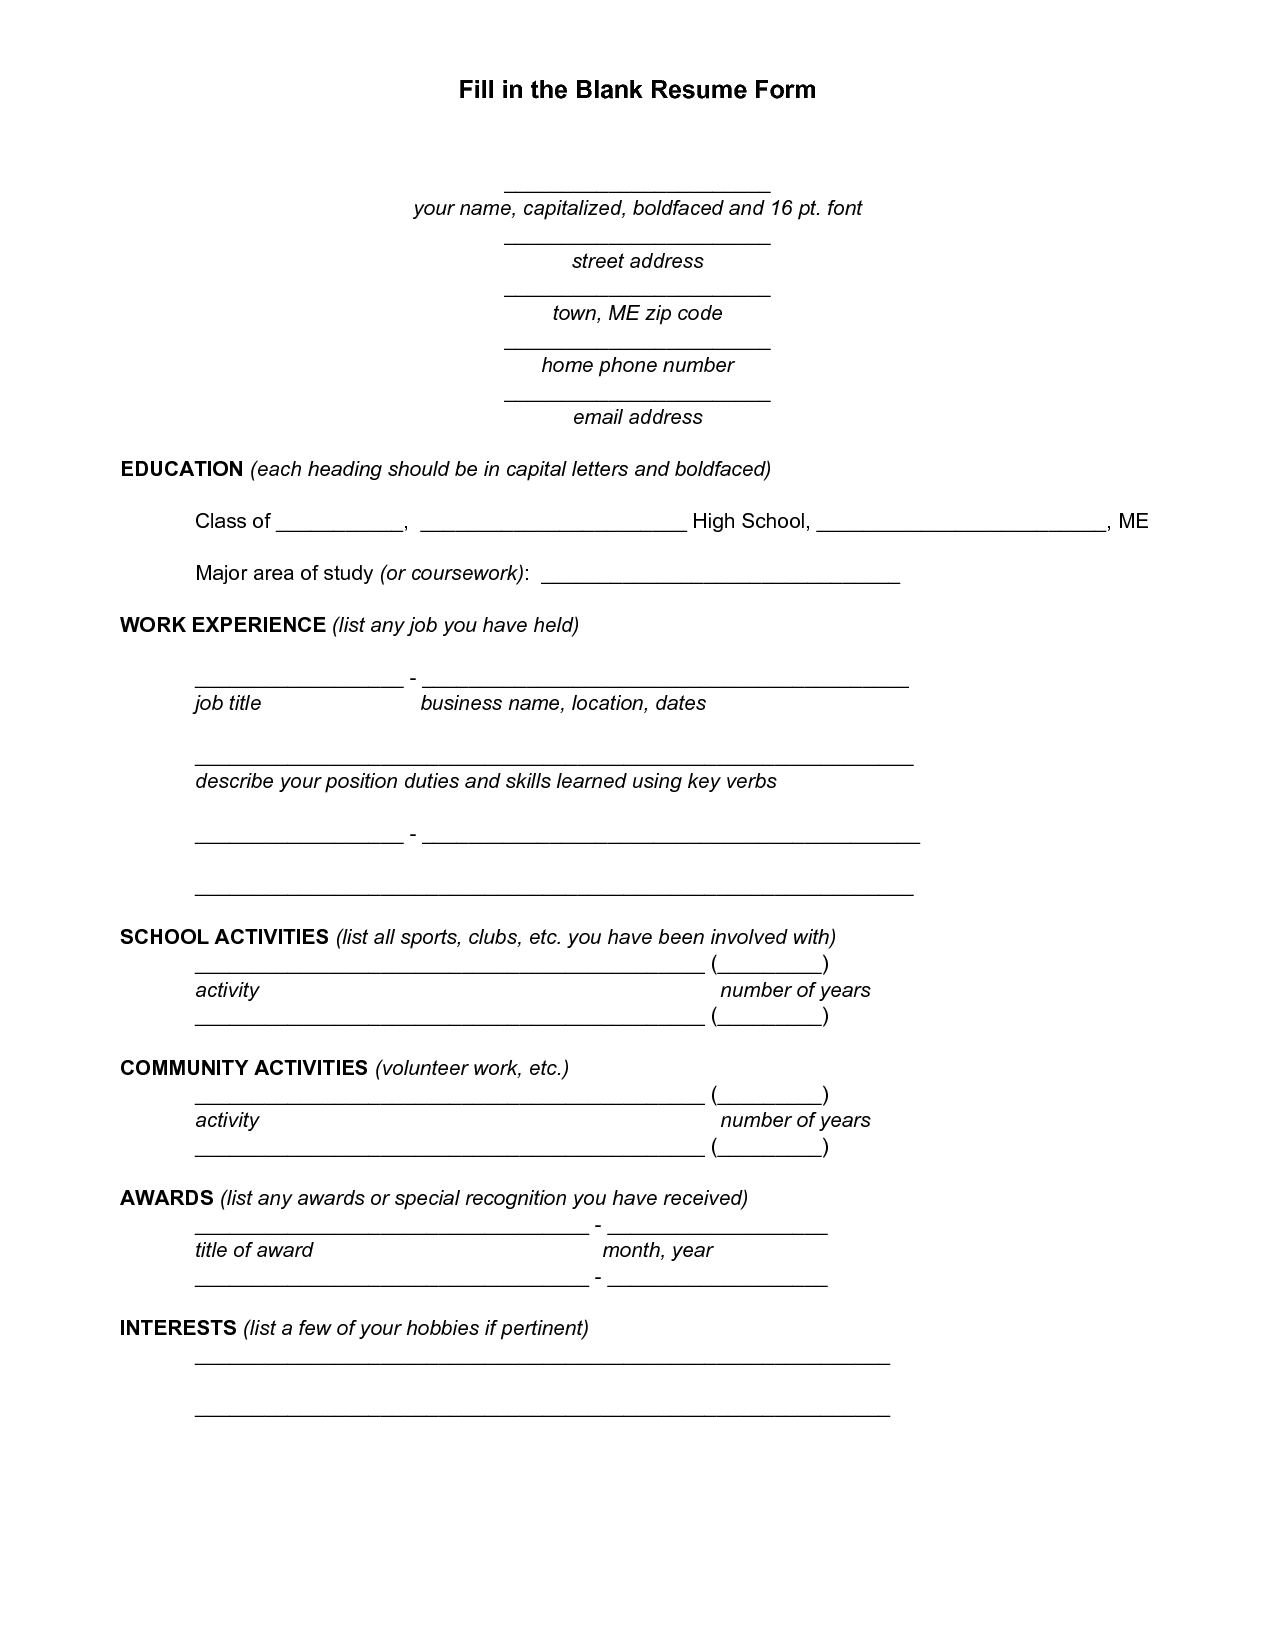 Resume Templates You Can Fill In , #resume # ...